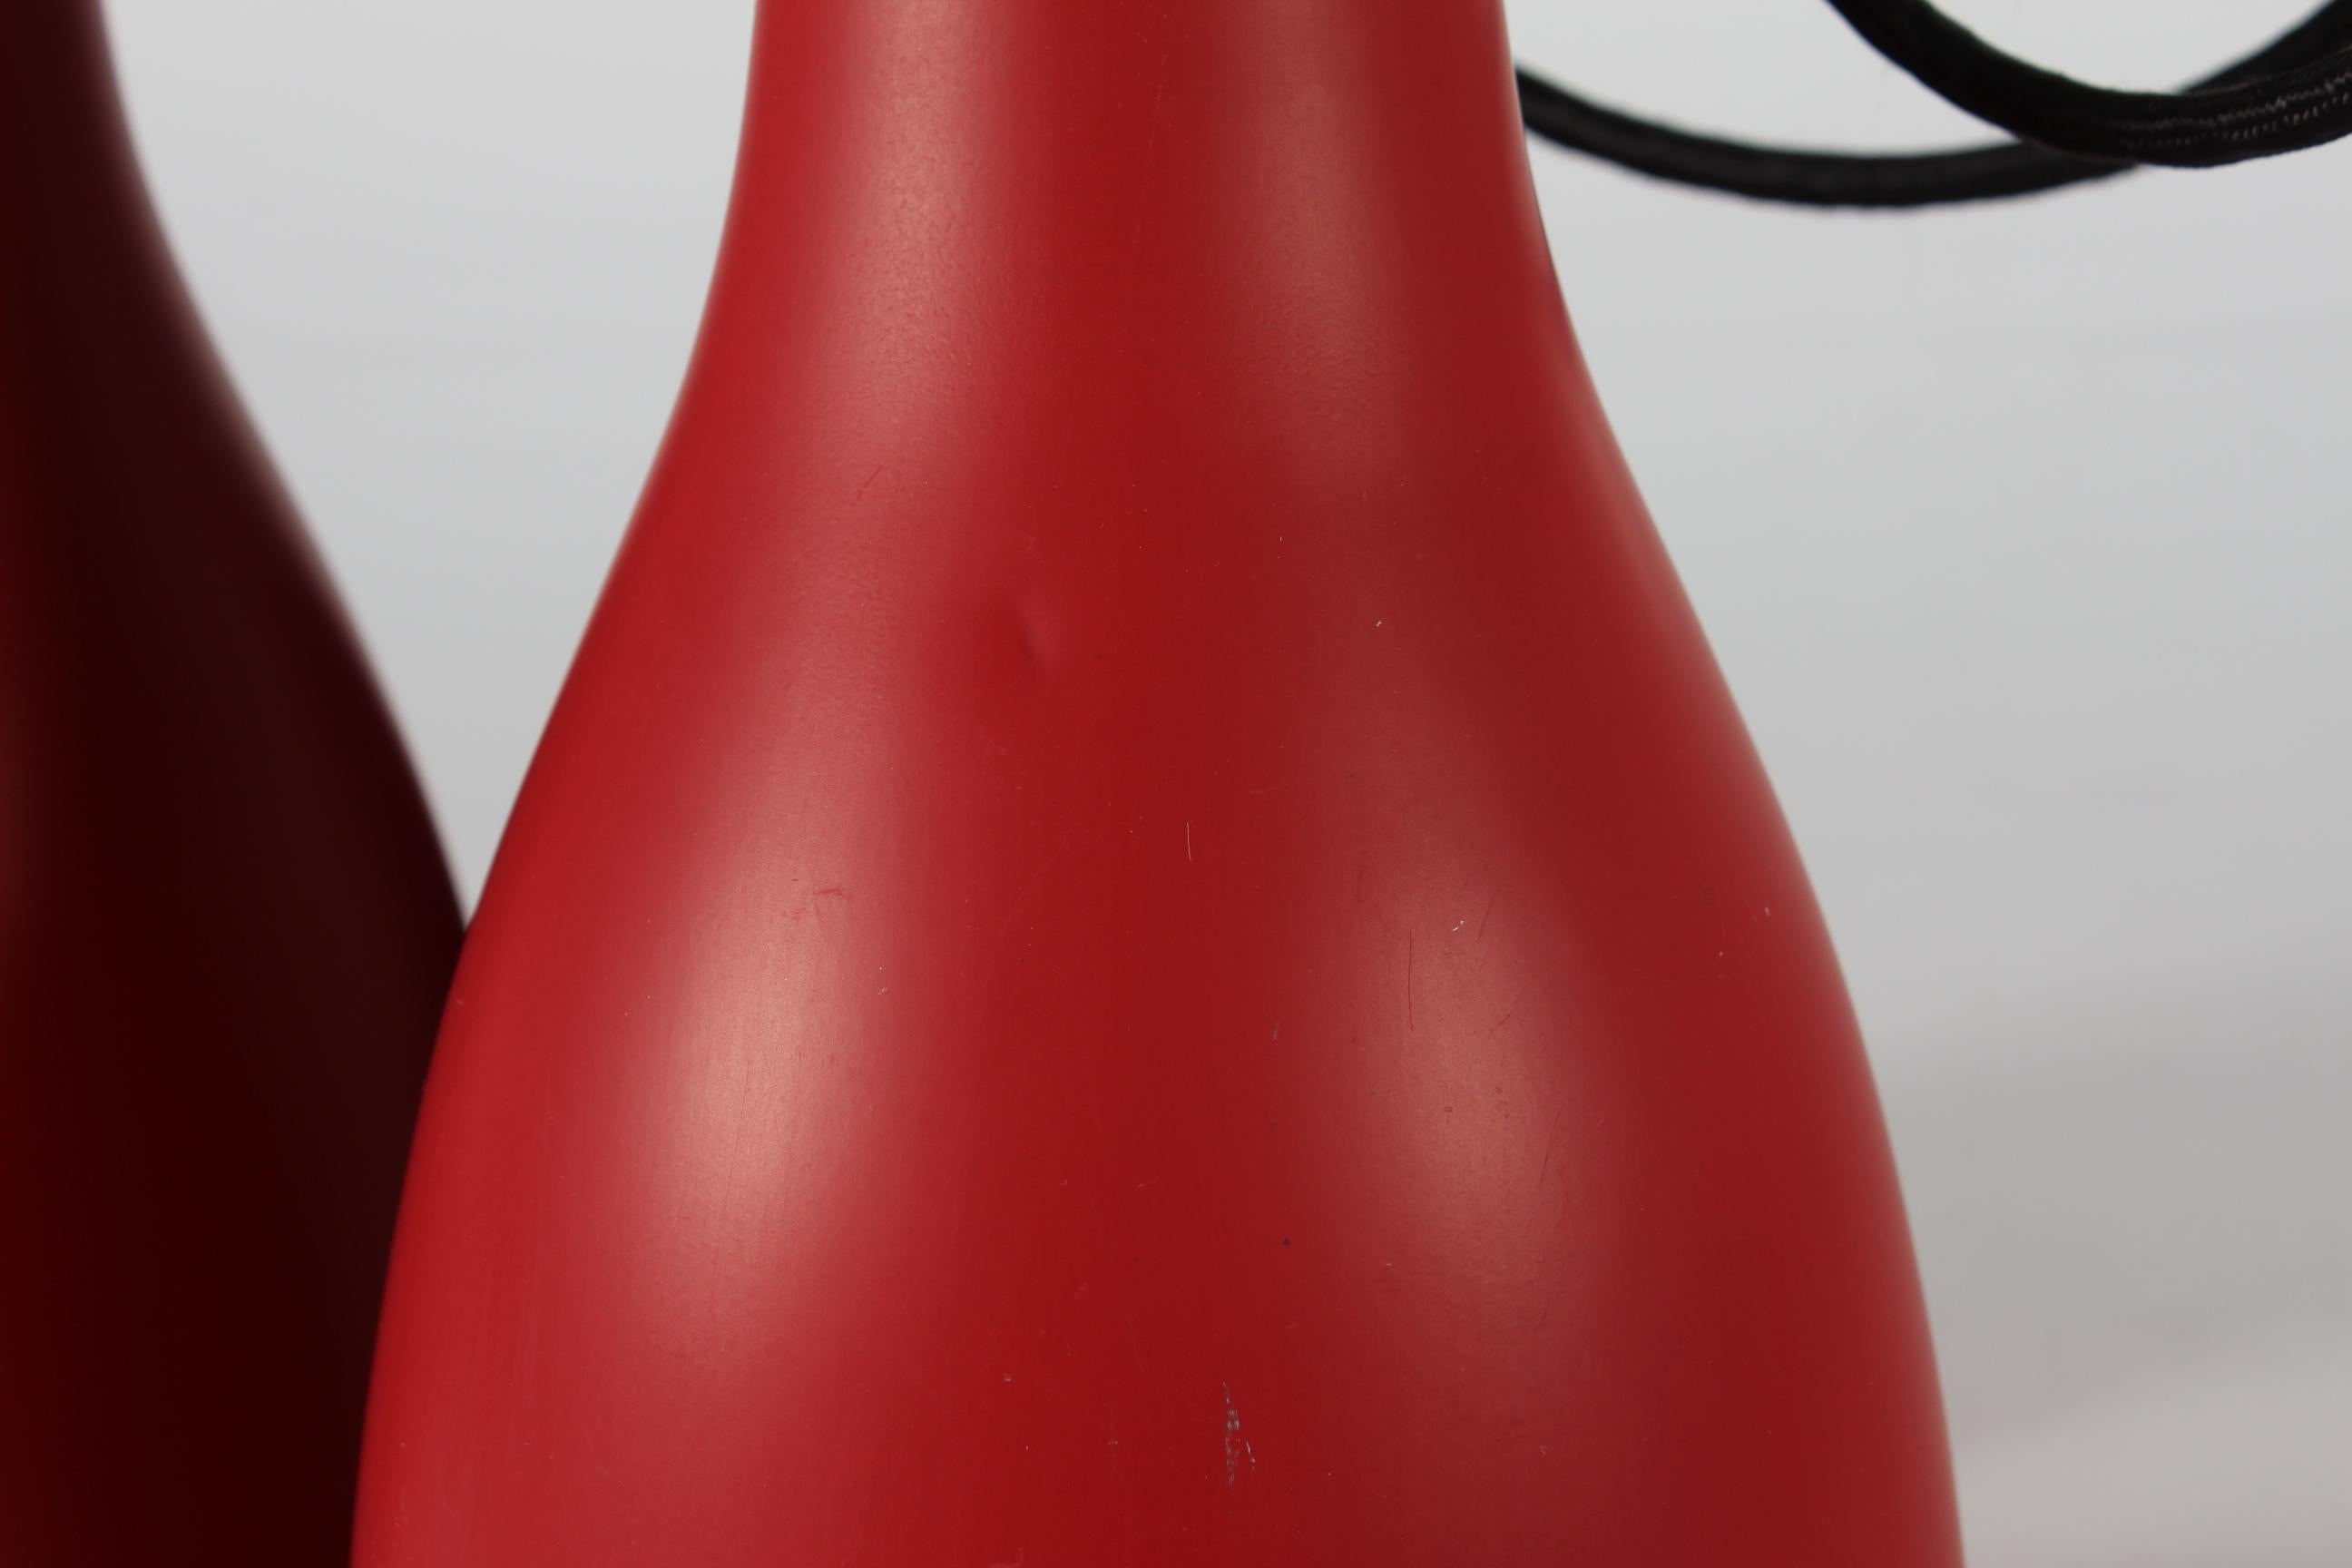 Bent Karlby 3-Cone Chandelier with Red Lacquer Made by Lyfa in Denmarkk, 1950s For Sale 4